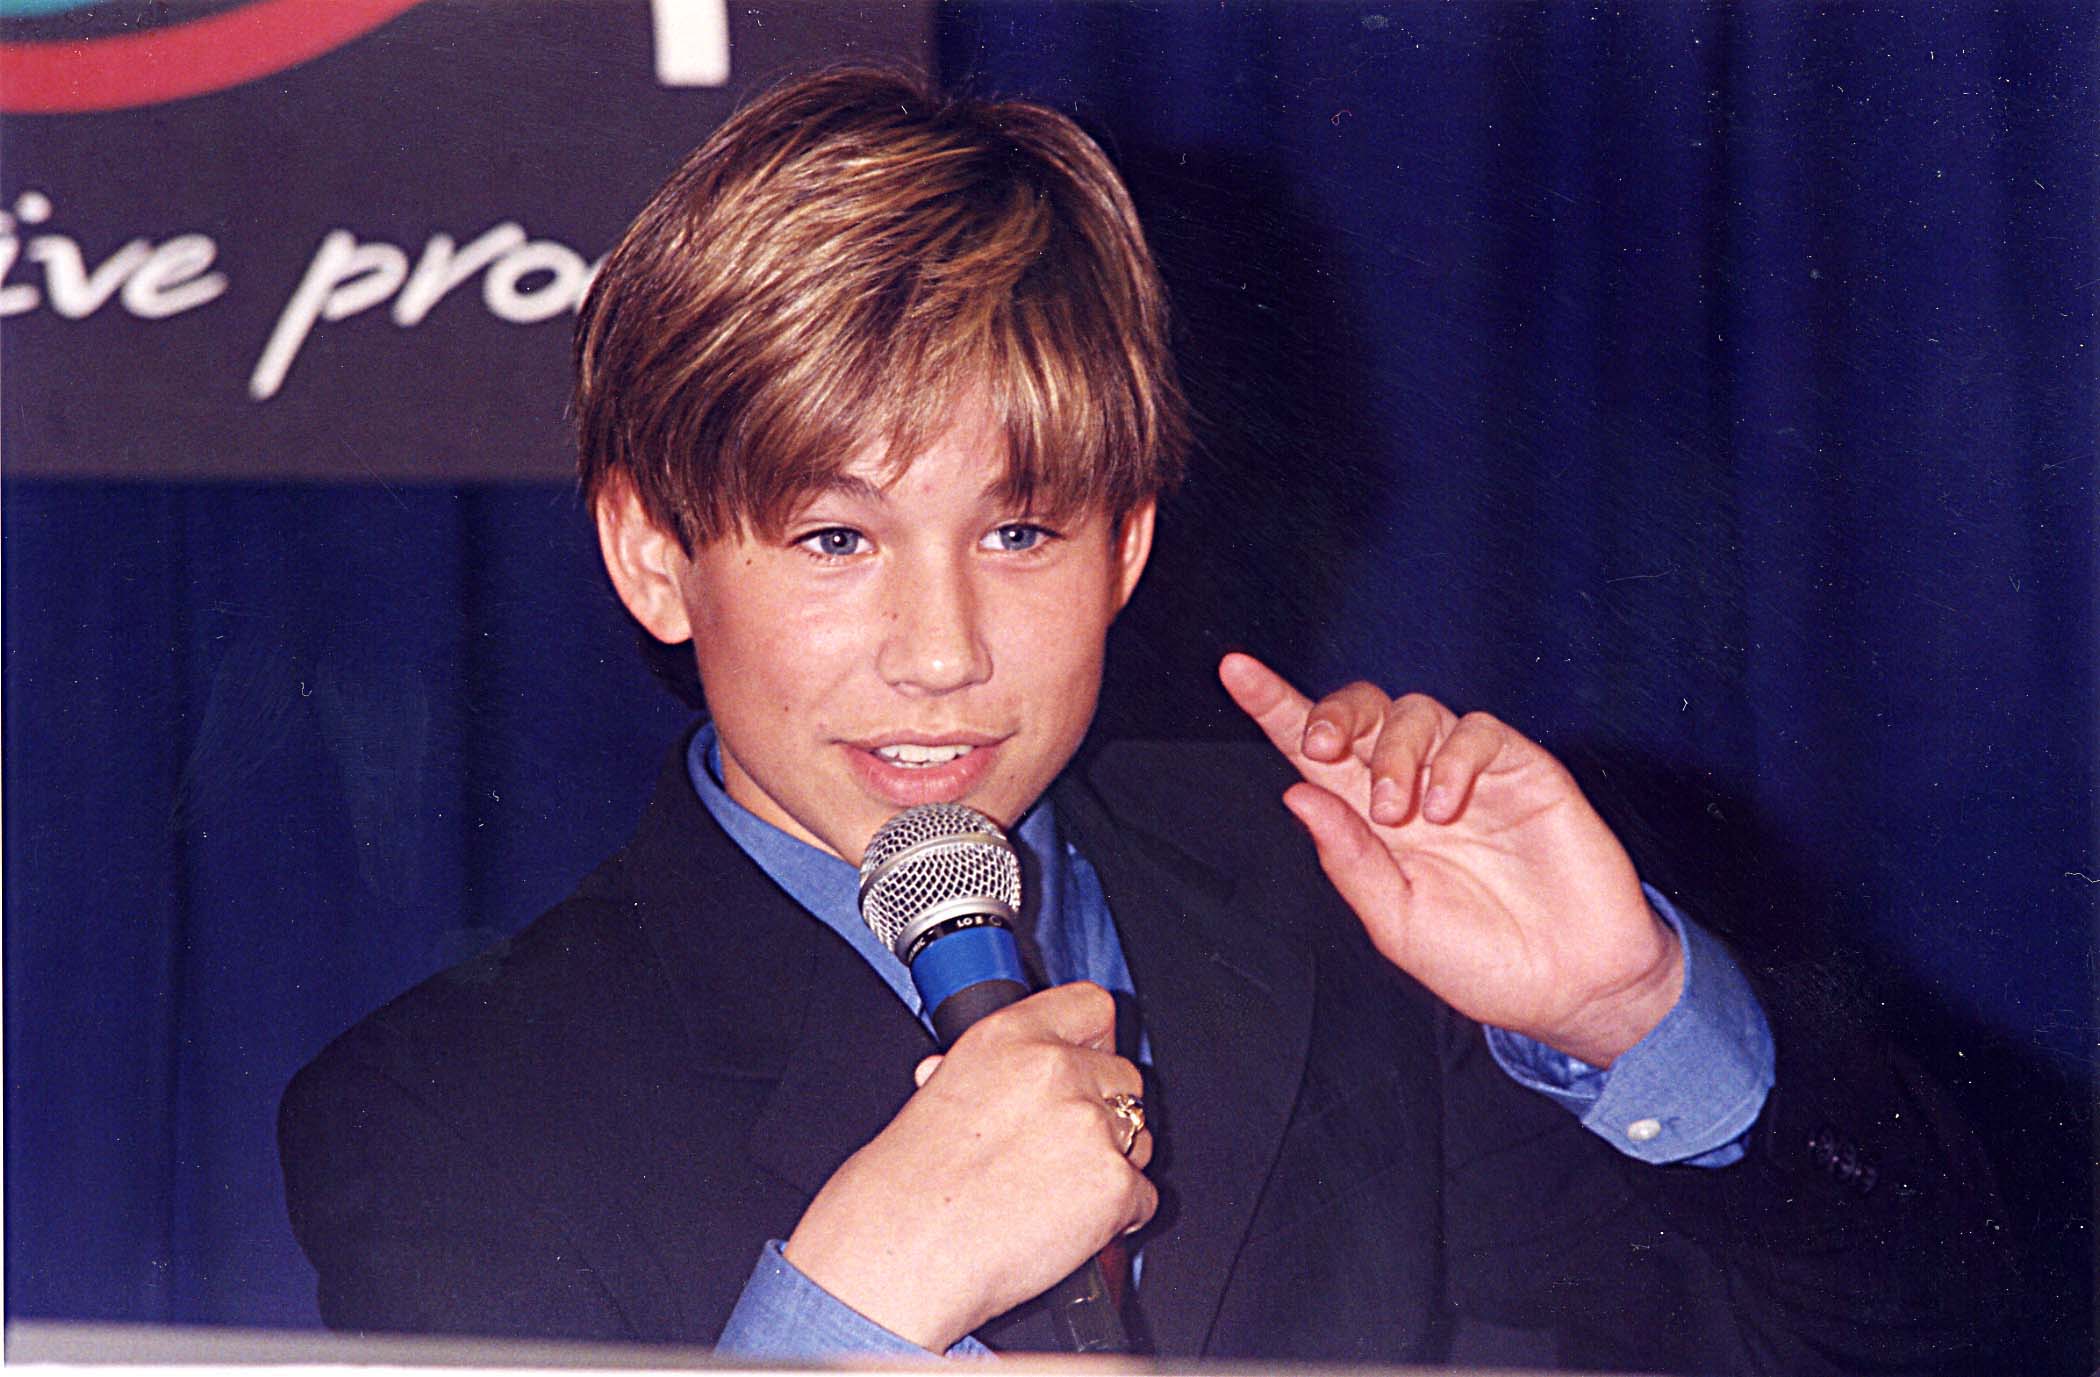 Jonathan Taylor Thomas during ShoWest '96 in Las Vegas, Nevada, United States. | Source: Getty Images